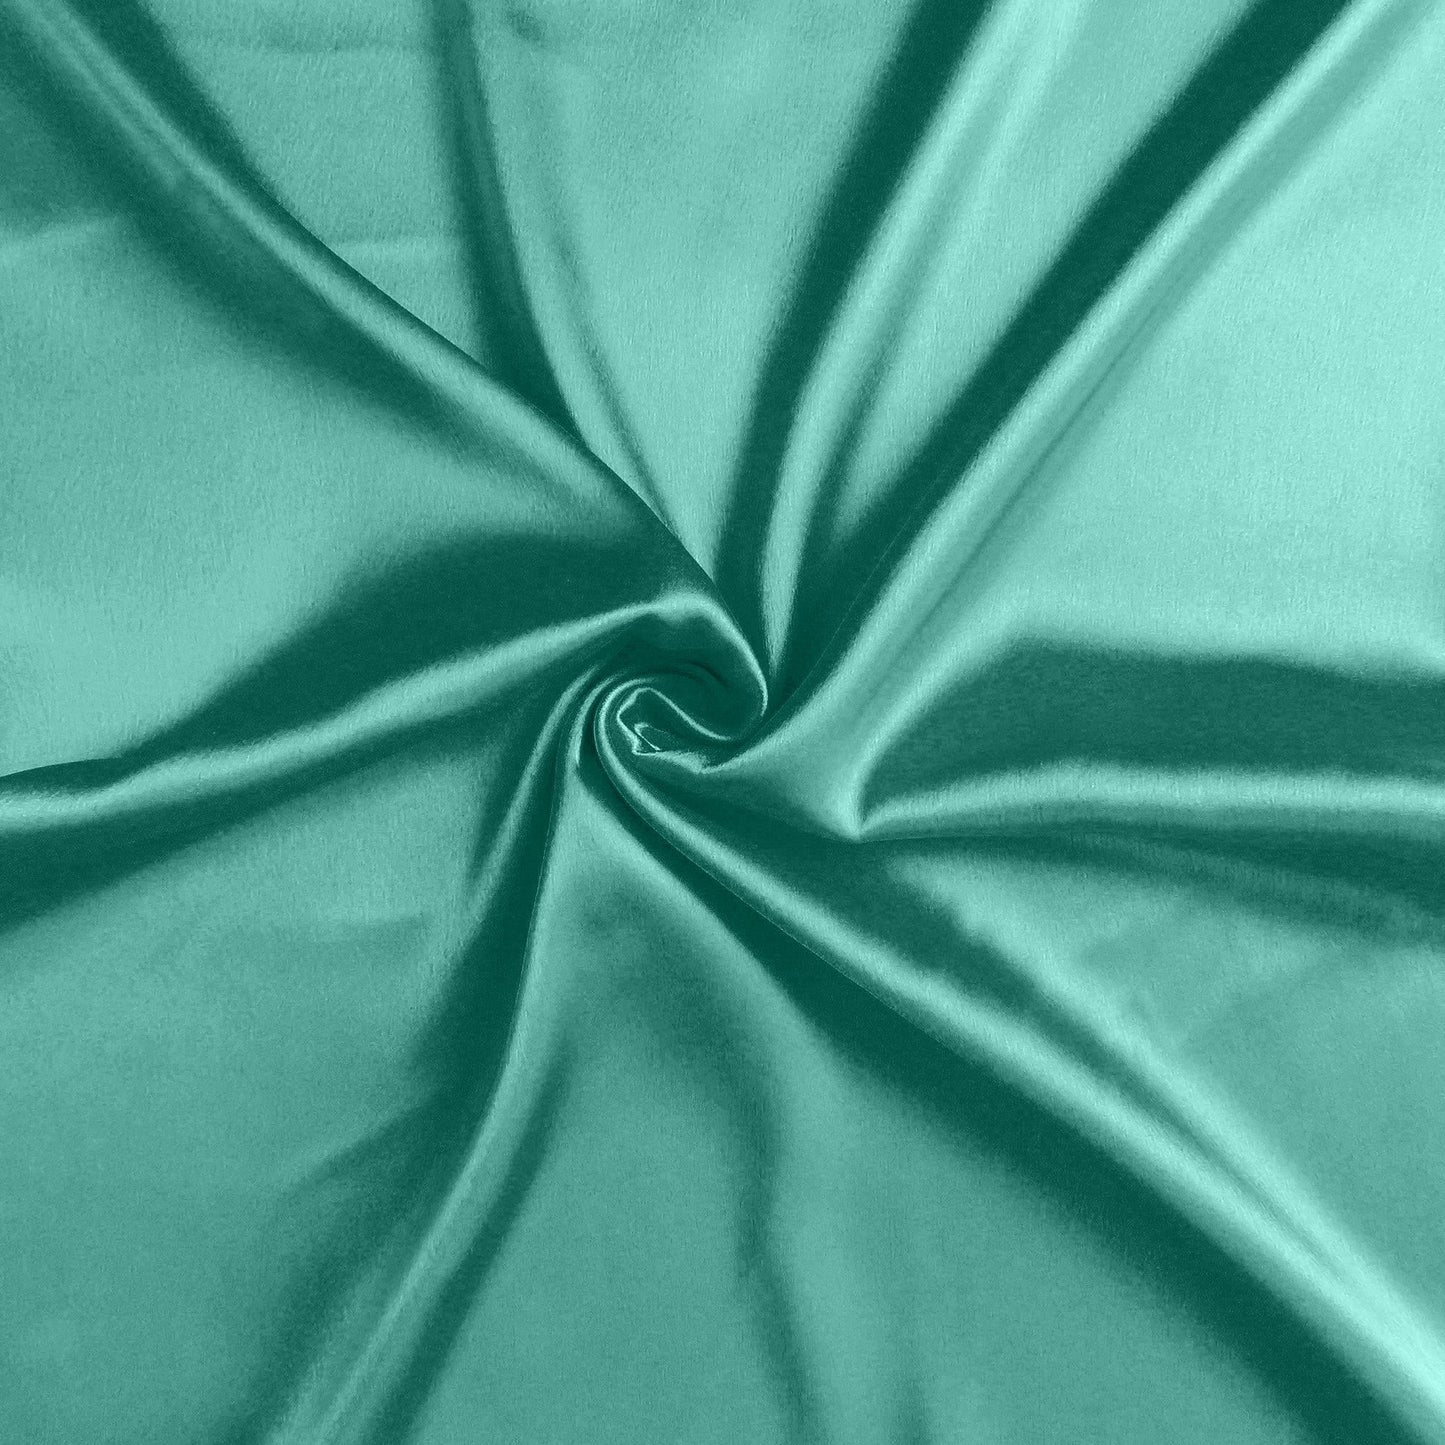 Luxury Soft Plain Satin Silk Pillowcases in Set of 2 - Bayberry Green